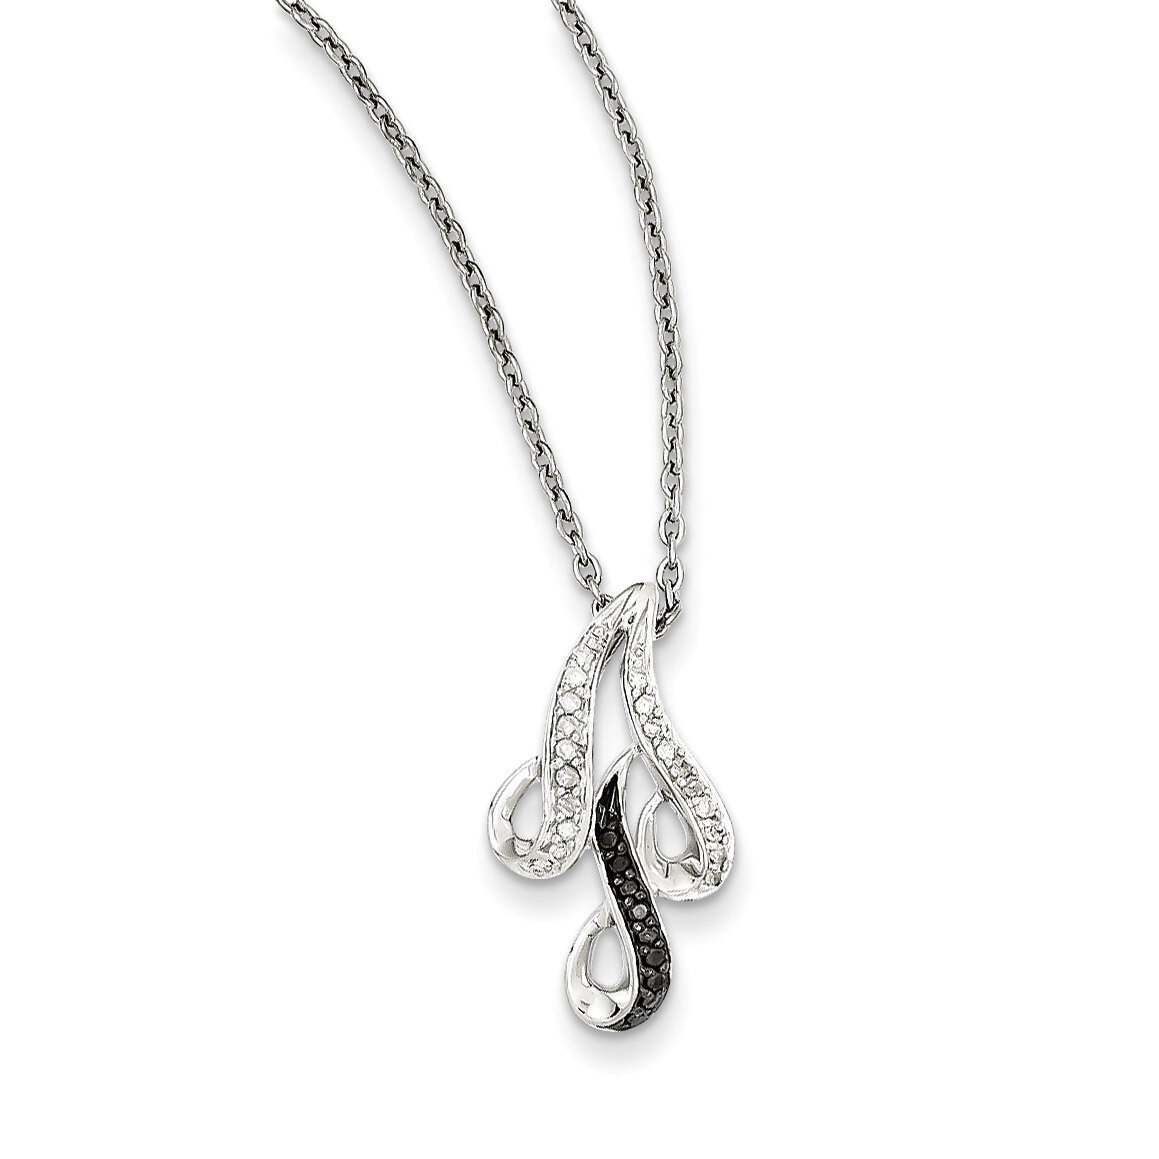 Black and White Diamond Pendant Necklace Sterling Silver QP2276